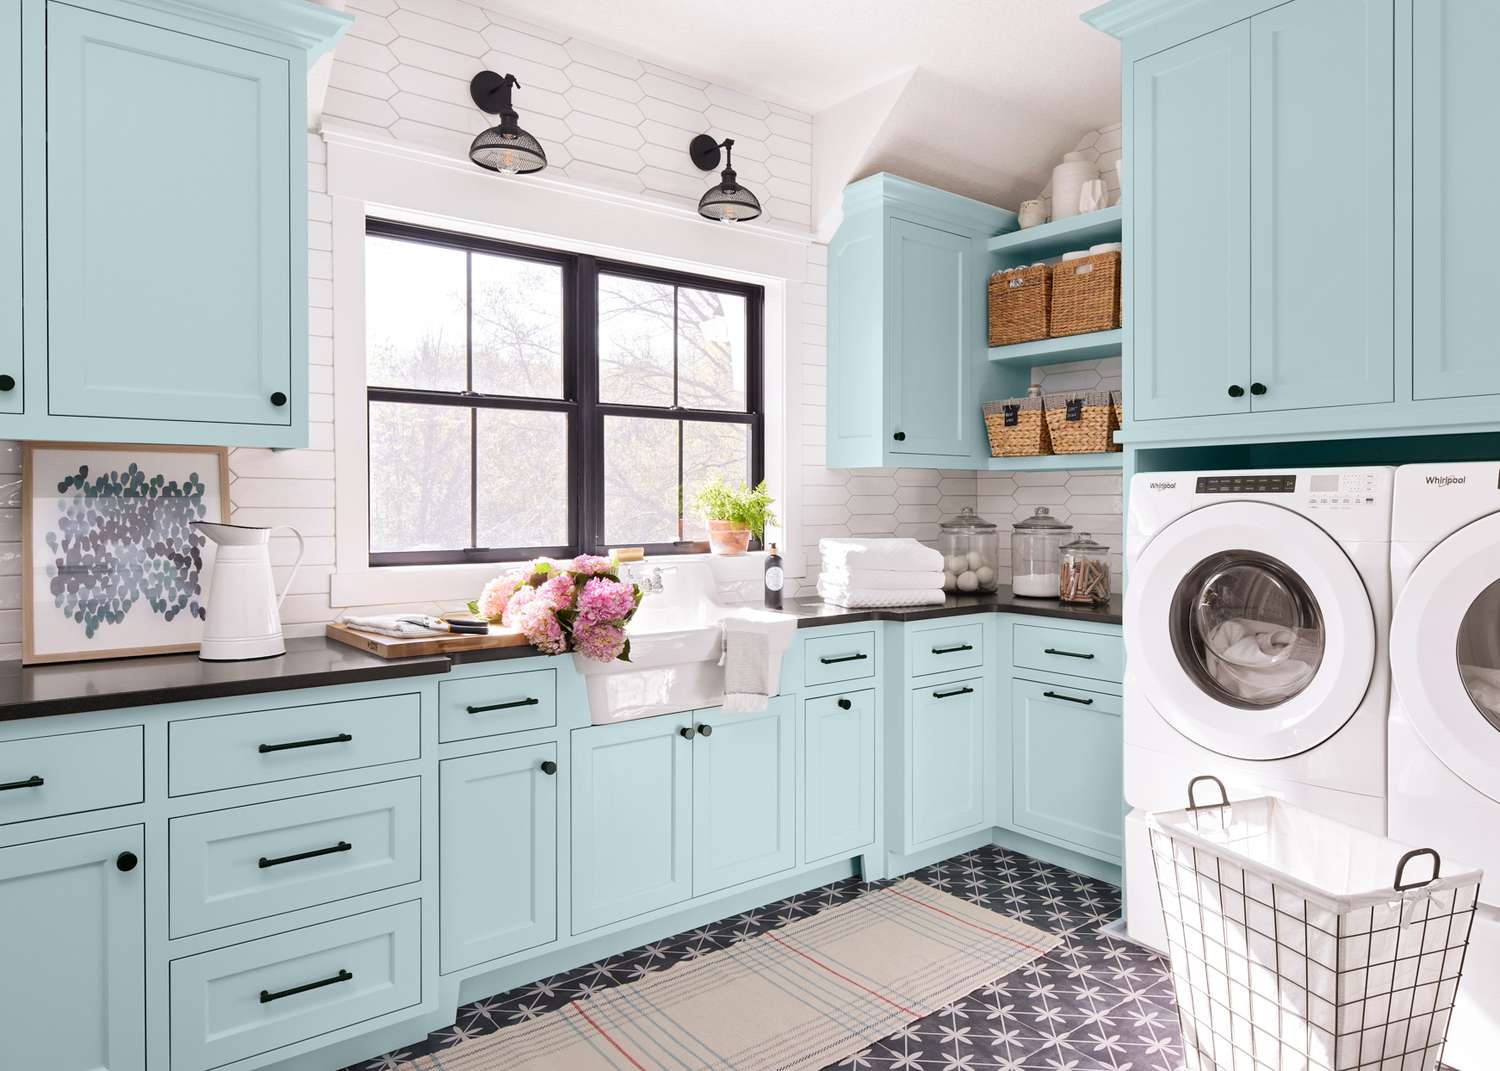 Tour This Sunny, Storage-Packed Laundry Room Makeover